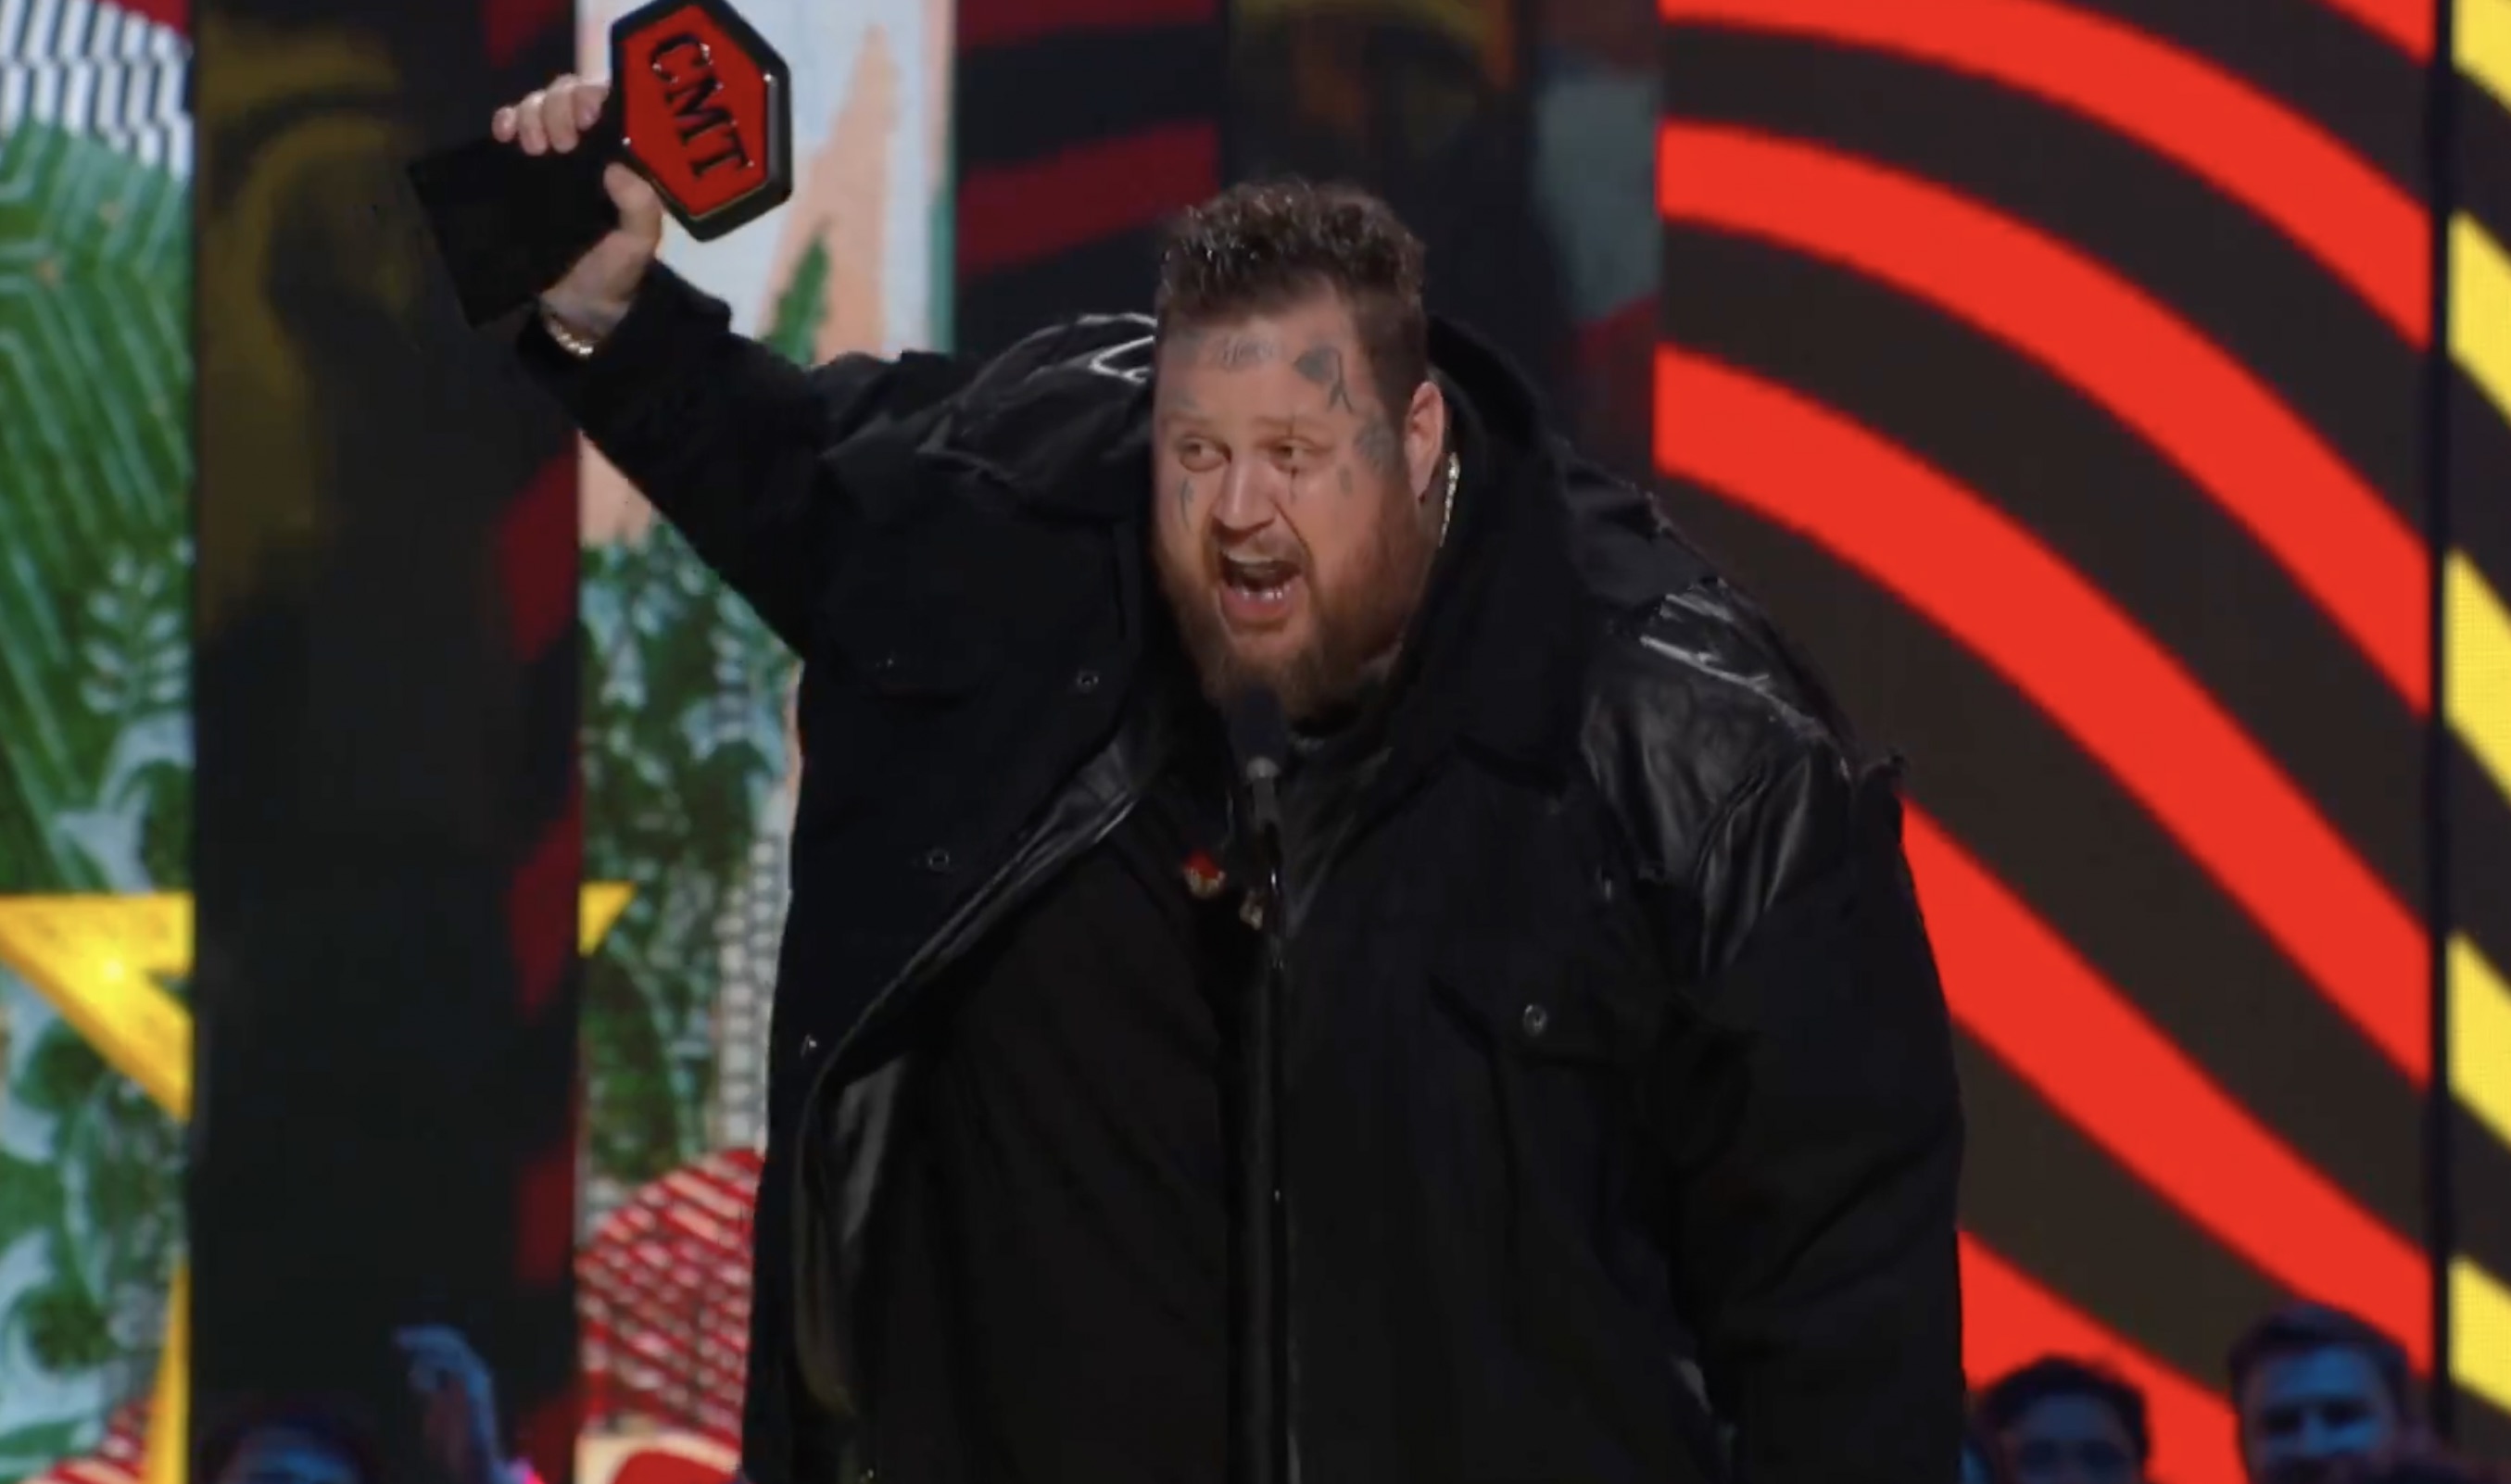 Jelly Roll gave a warning to Gayle during his acceptance speech